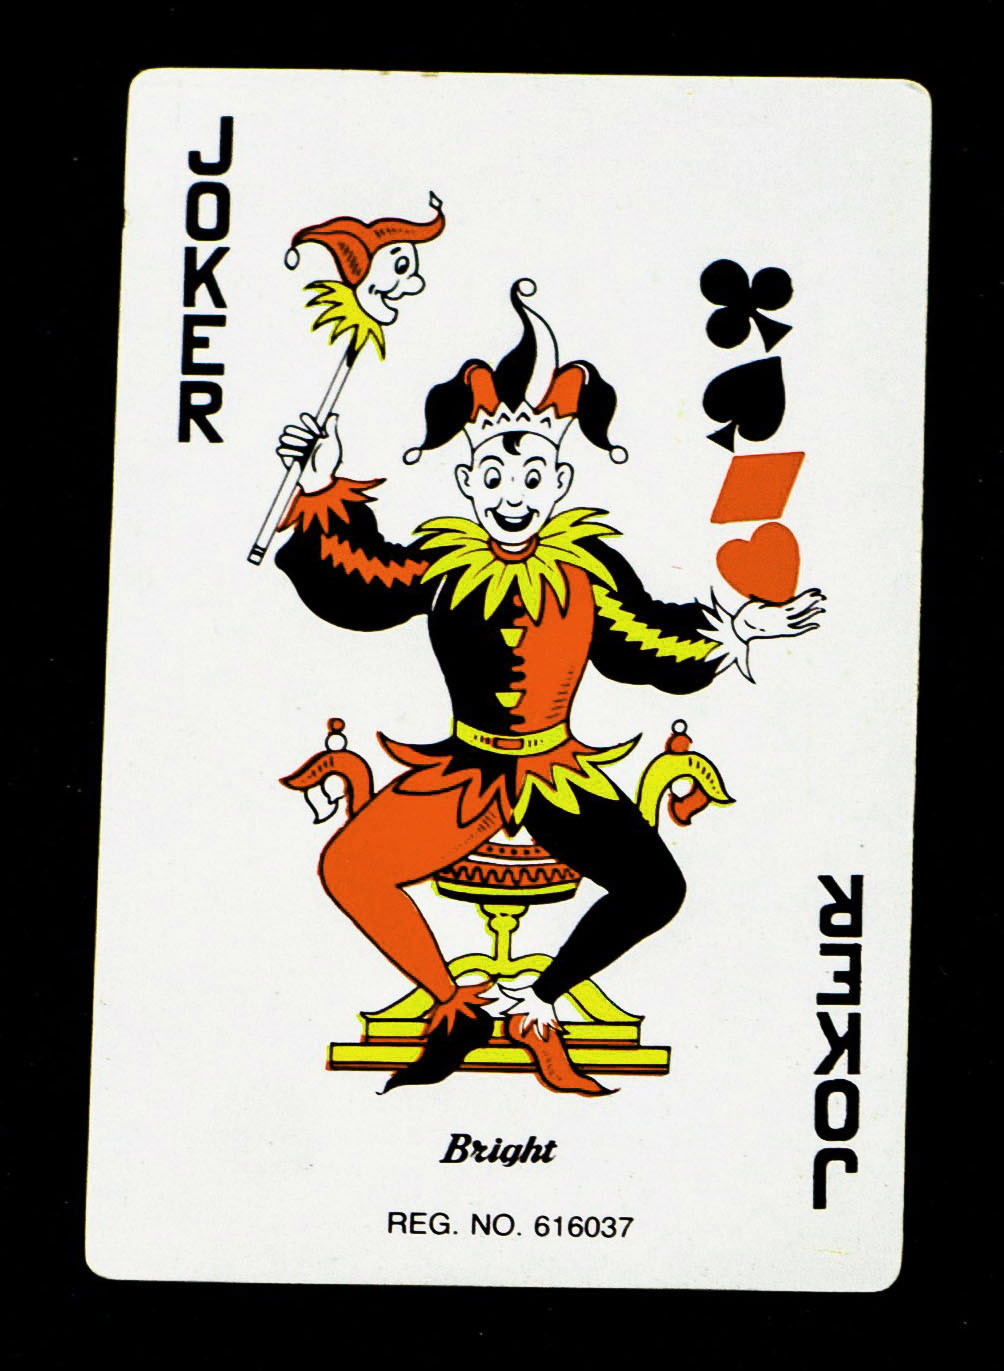 retro style joker playing card in tones of orange, black and yellow